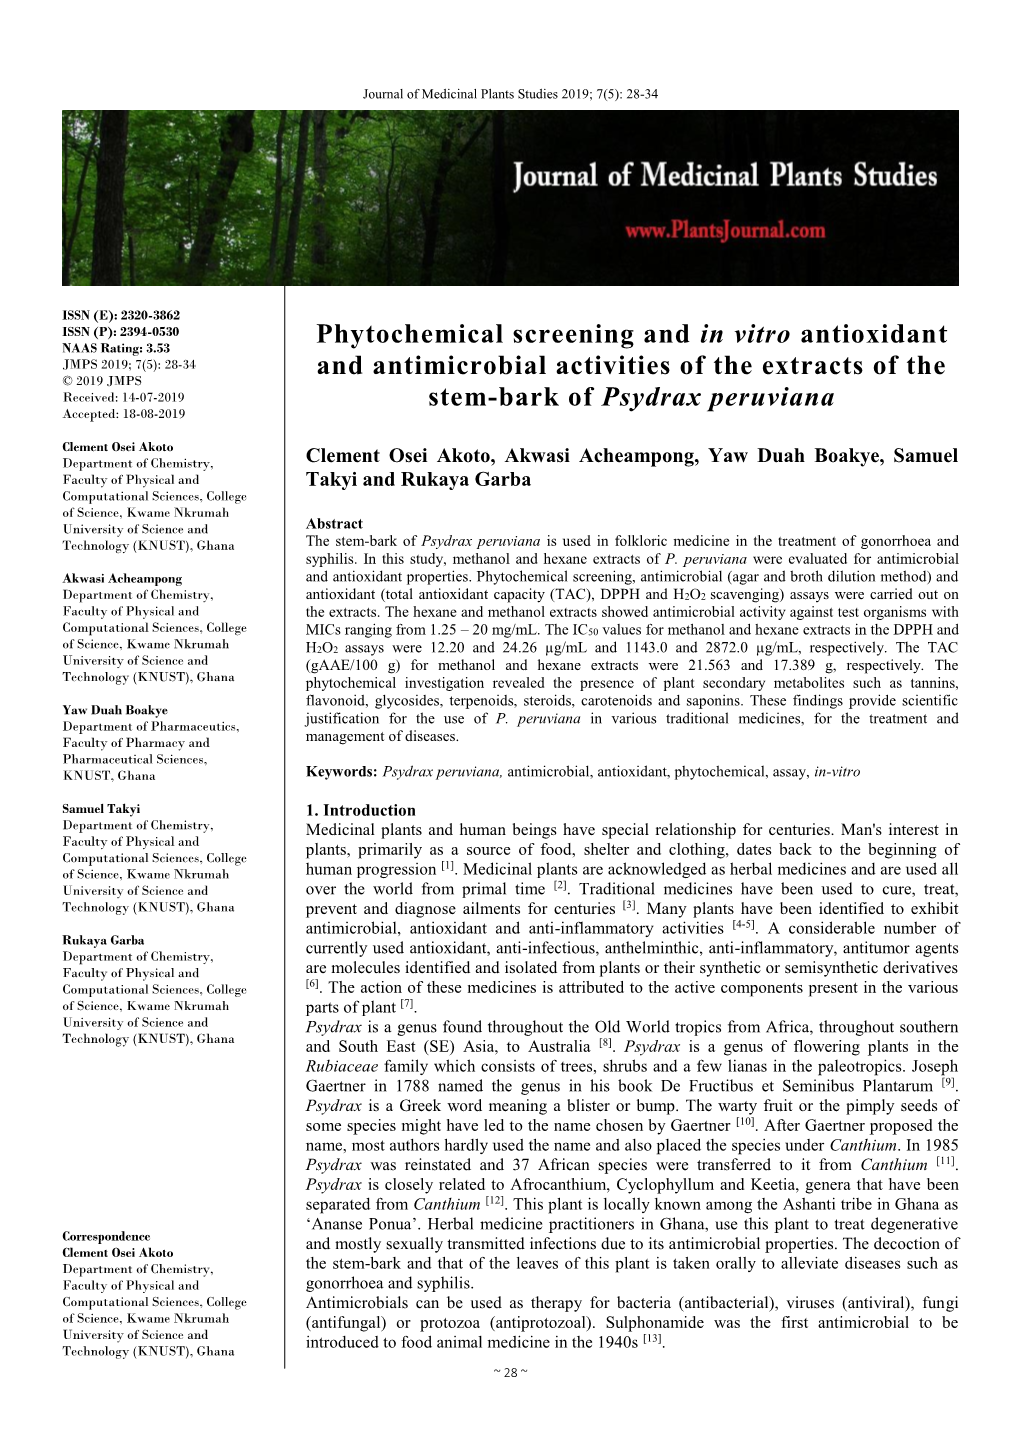 Phytochemical Screening and in Vitro Antioxidant and Antimicrobial